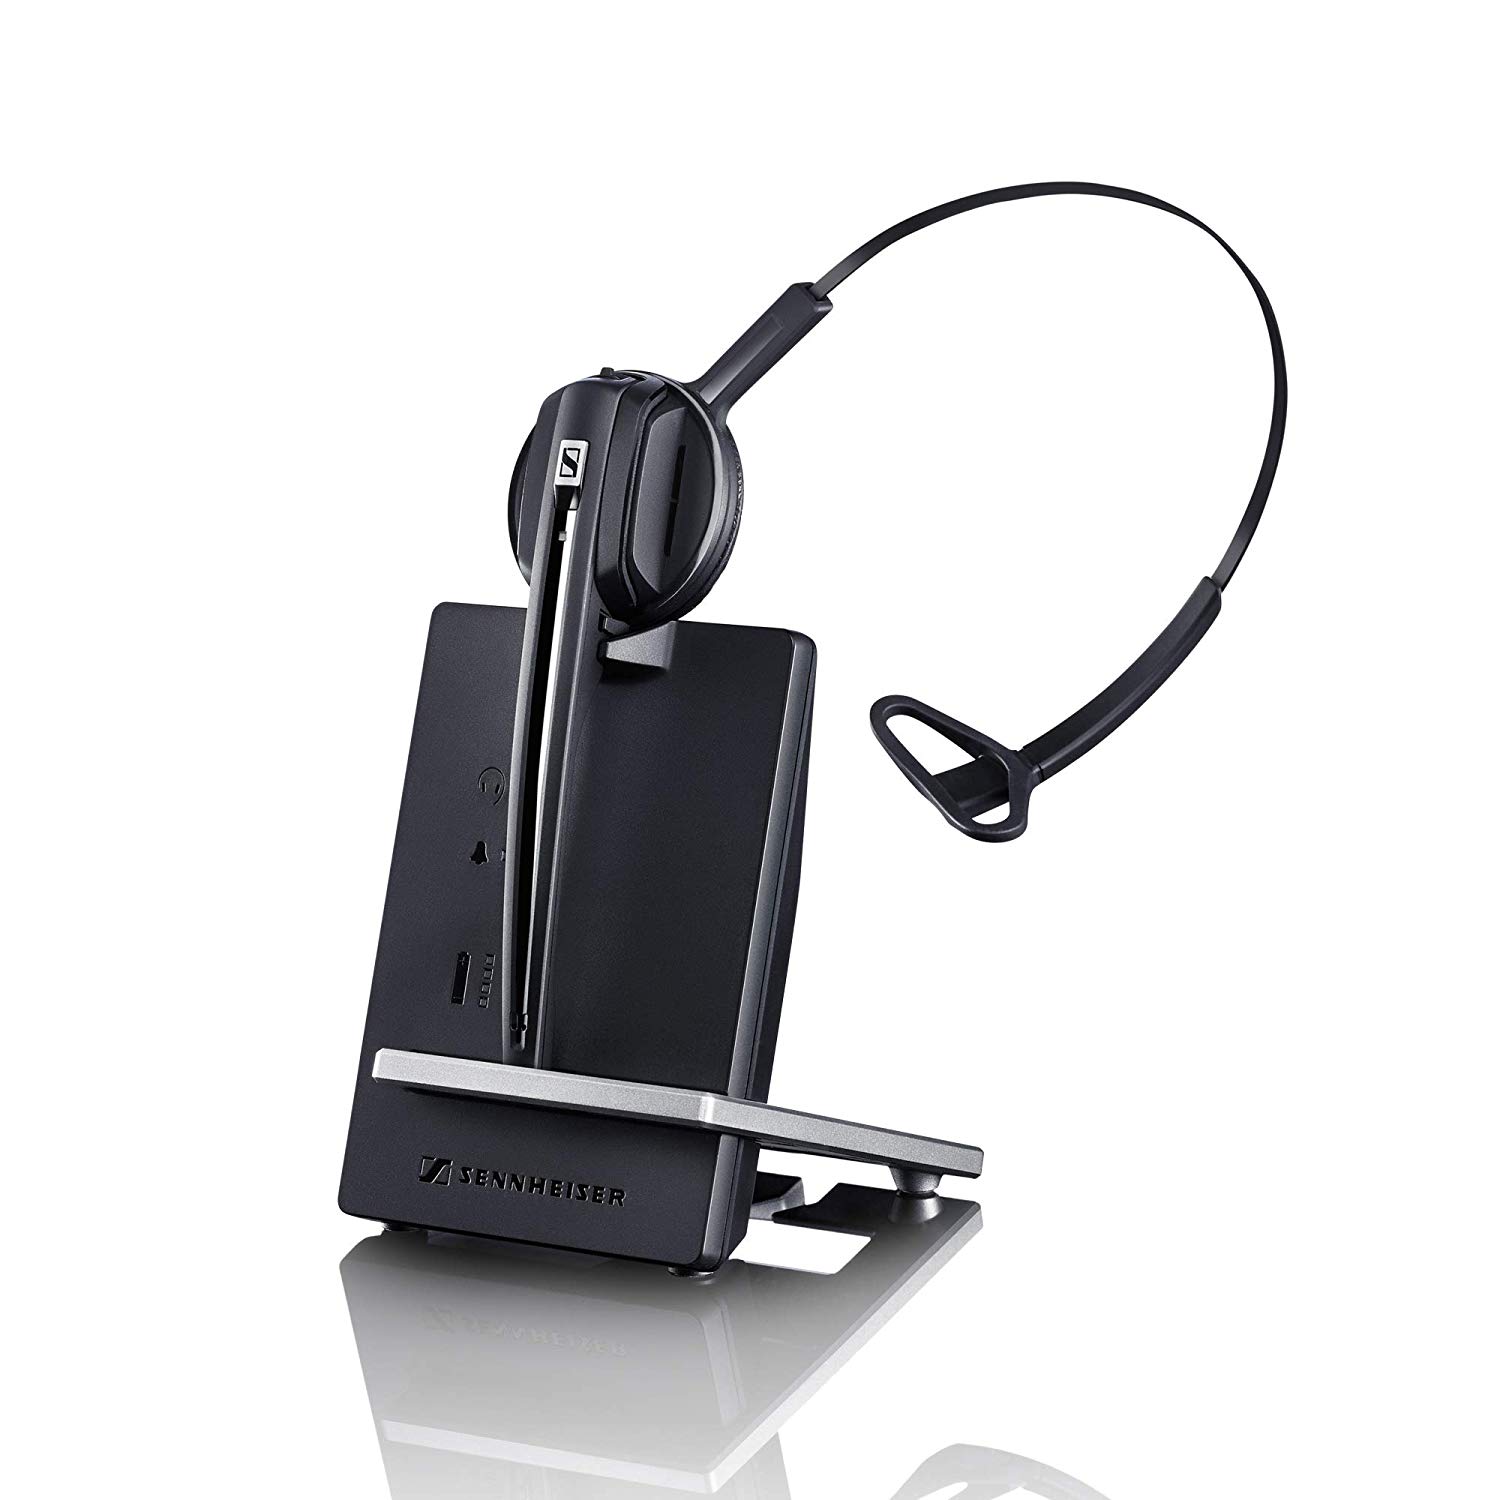 Sennheiser D 10 Phone (506410) Single-Sided Wireless DECT Headset for Direct Desk Phone Connection, with Noise Cancelling Microphone (Black)